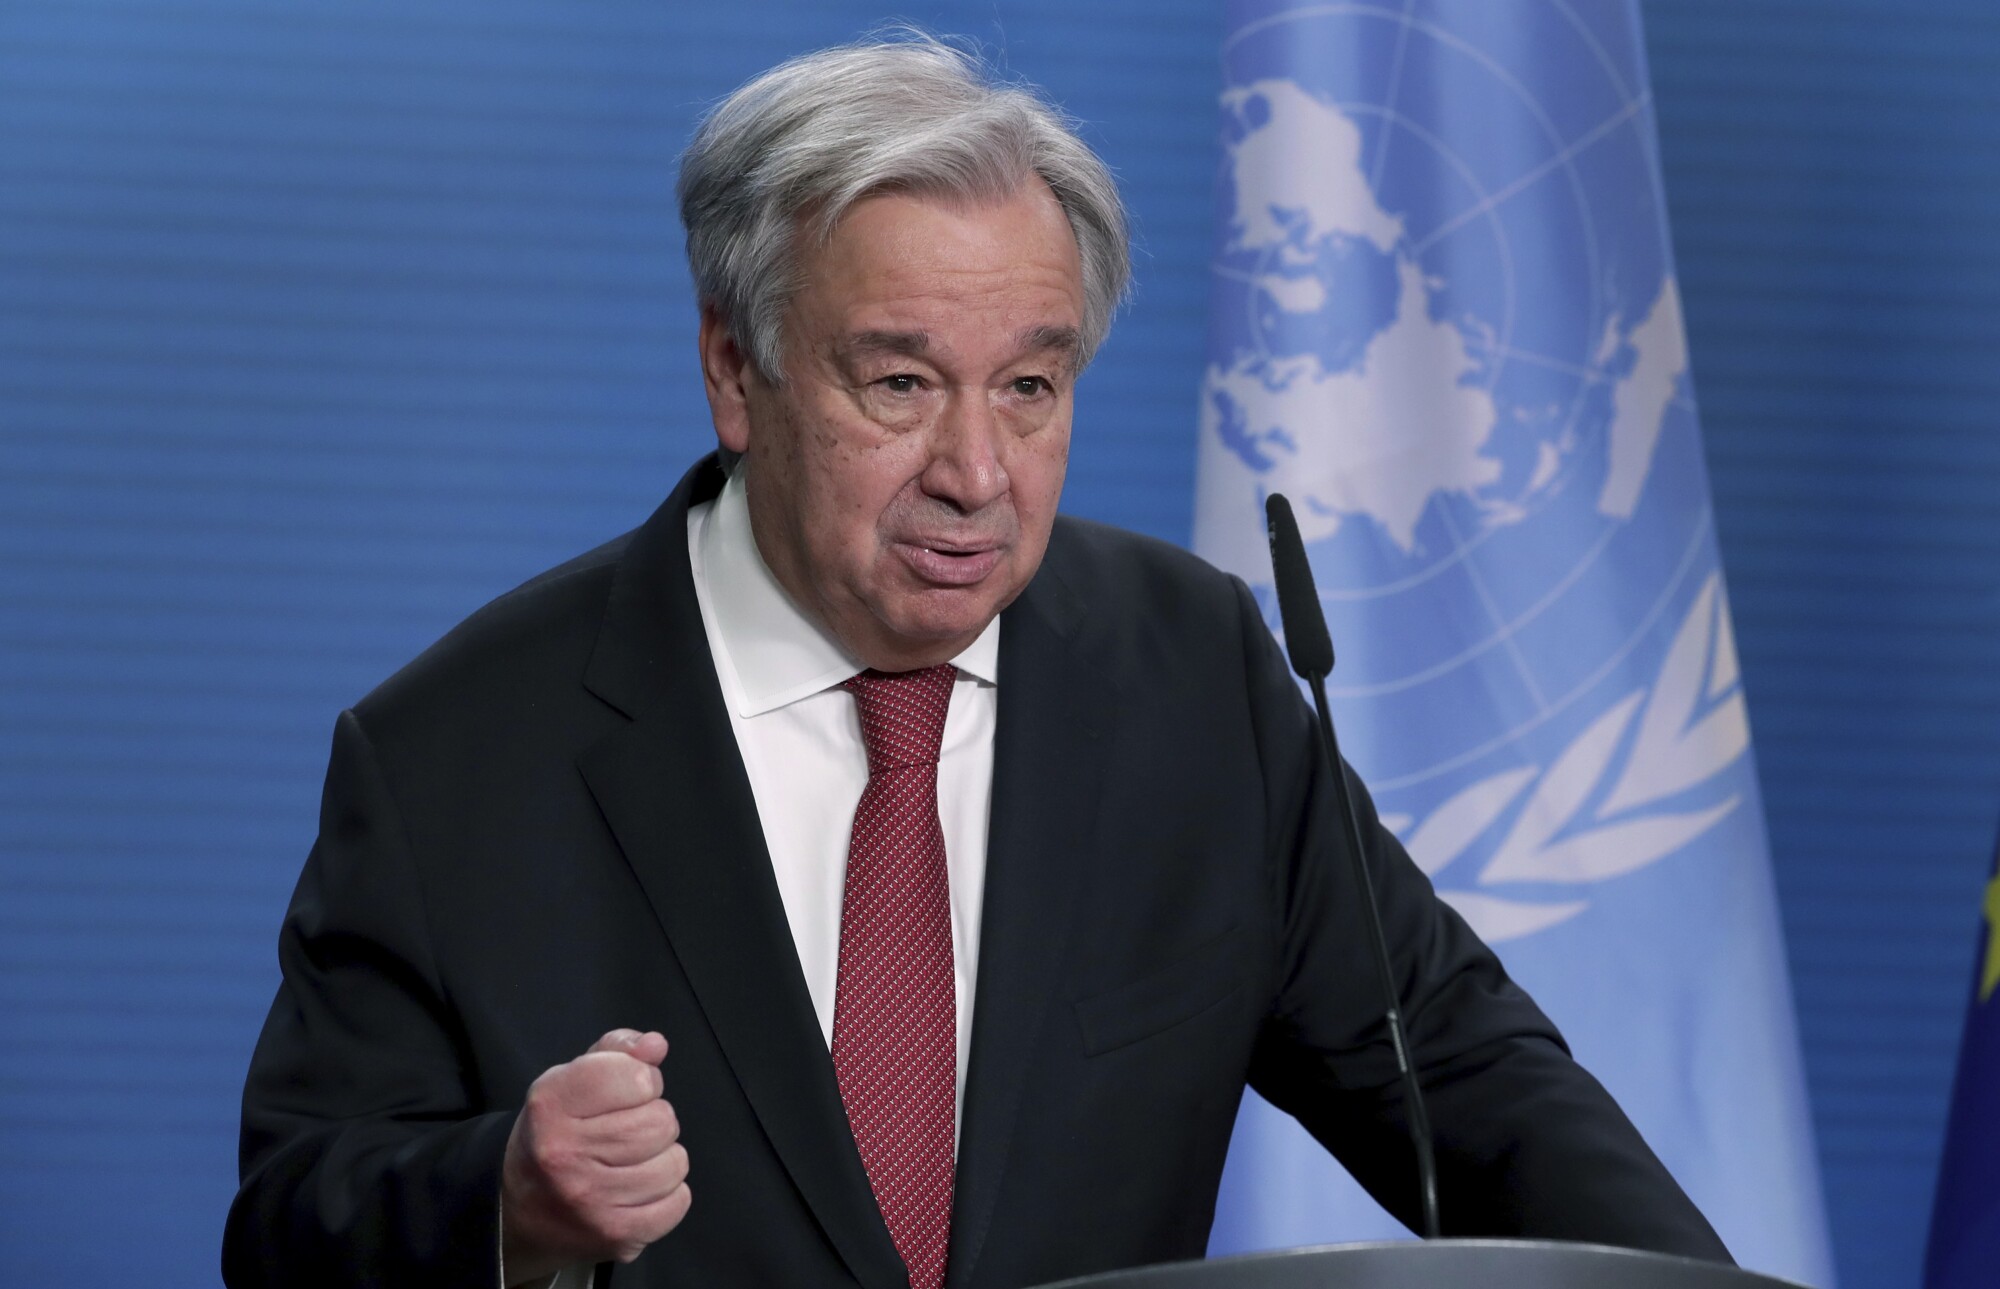 UN Chief on the Future of Fossil Fuels